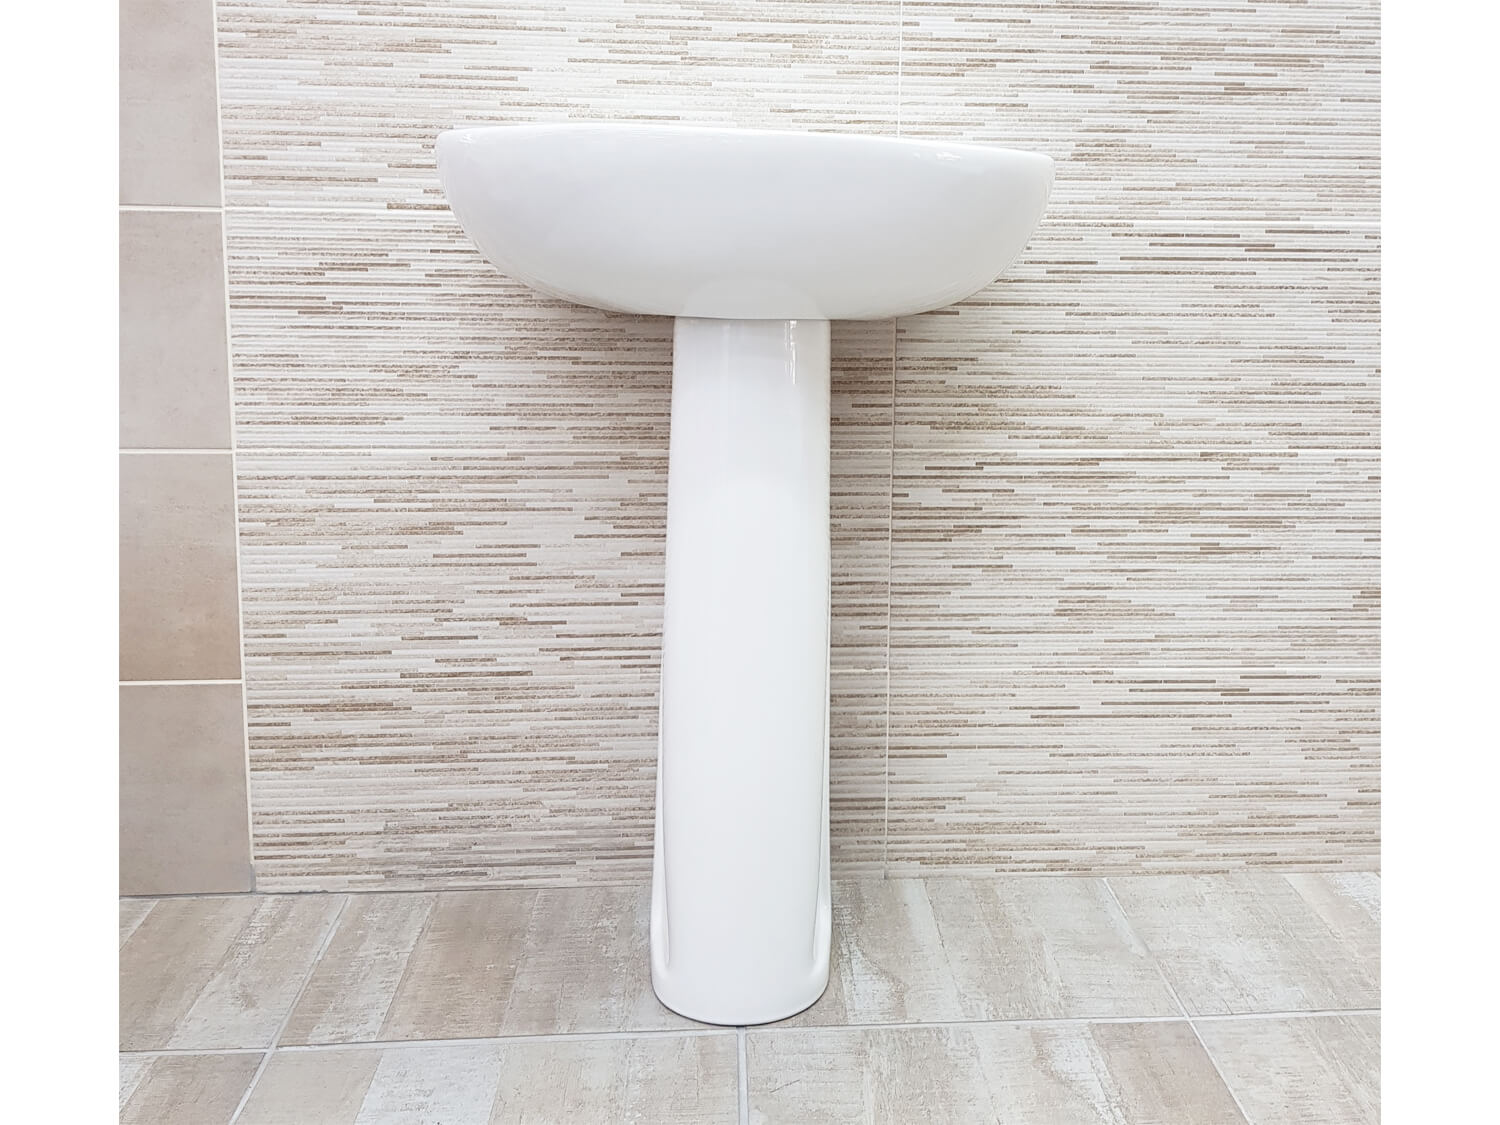 Delta White Wall Mounted Basin & Pedestal Set Front View